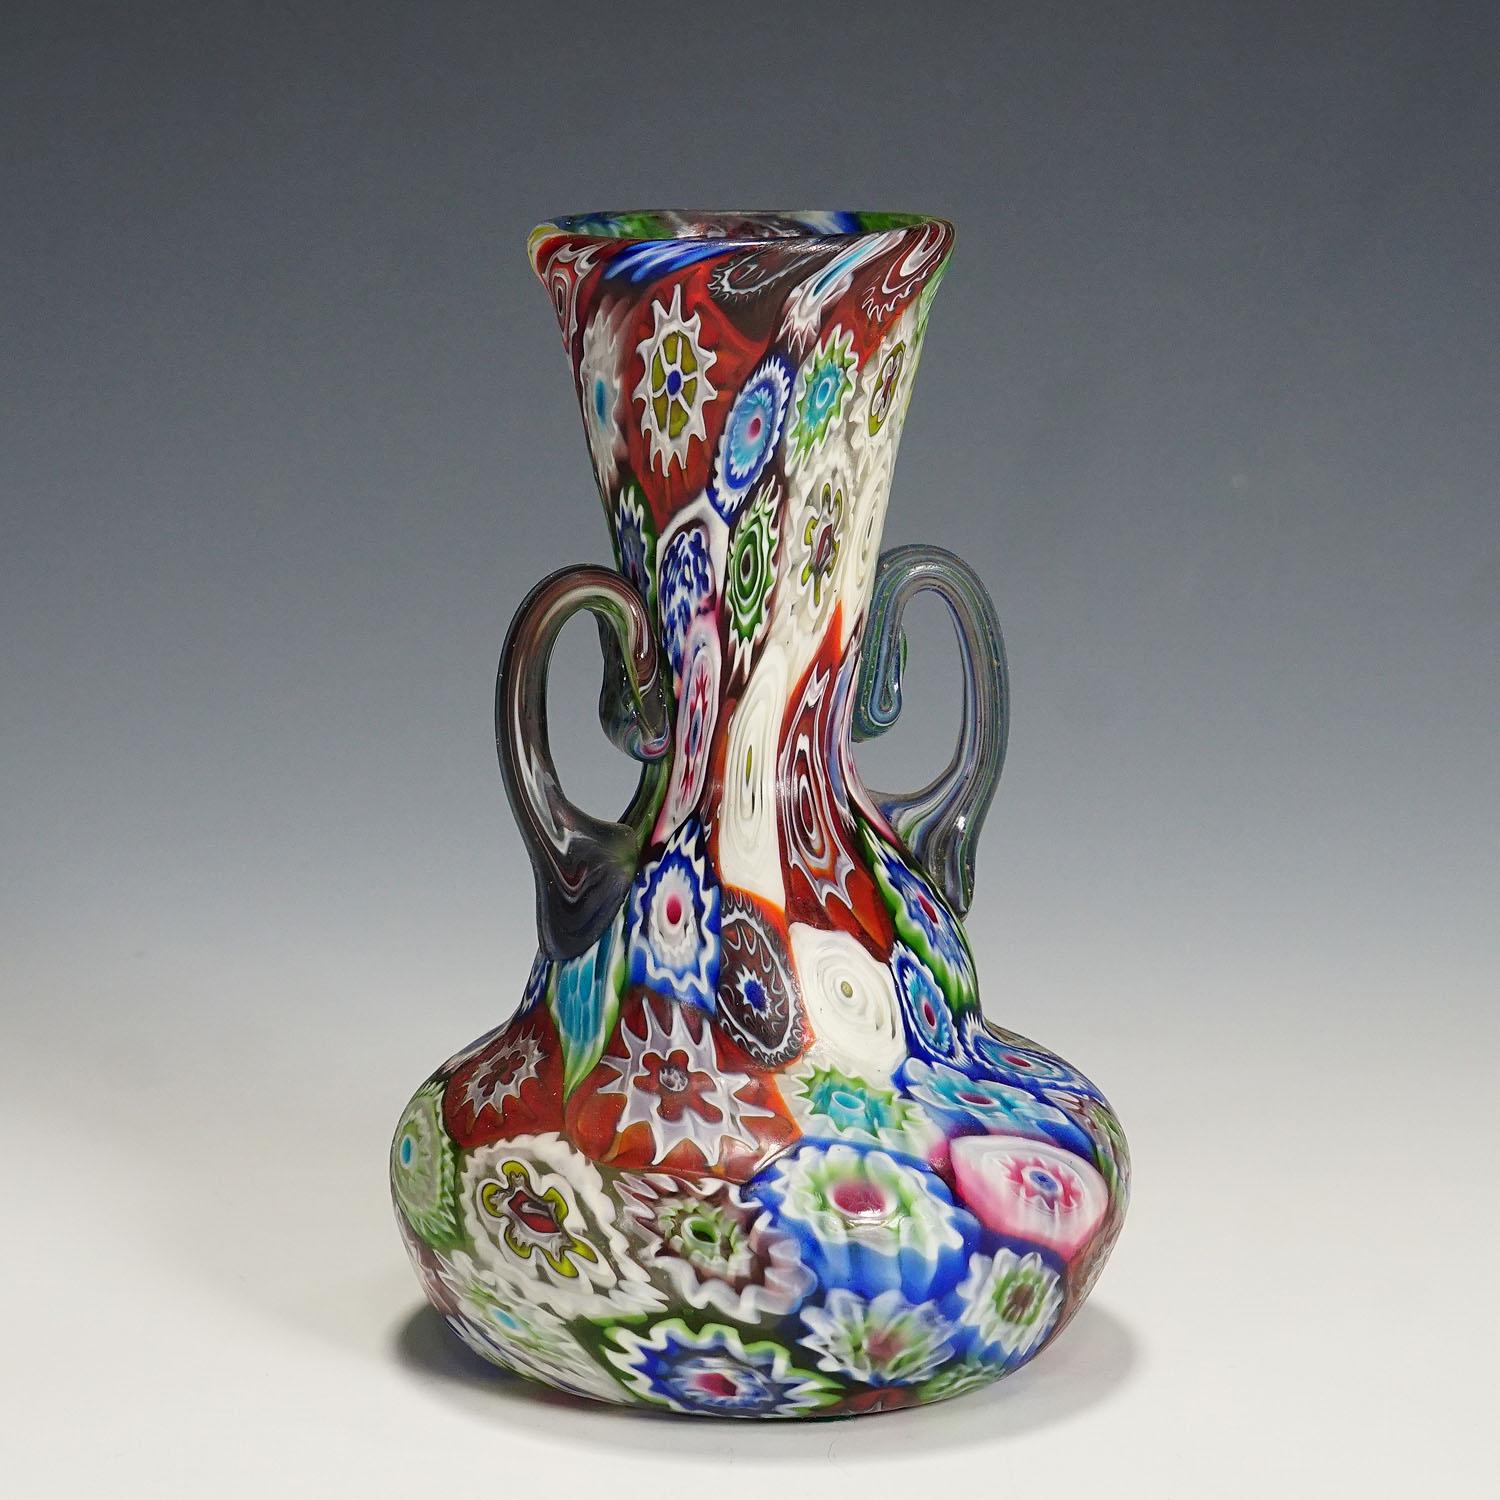 Antique Multicoloured Millefiori Vase with Handles, Fratelli Toso Murano 1910

An antique Millefiori murrine glass vase manufactured by Vetreria Fratelli Toso, Murano around 1910. Made of multicoloured murrines which where melted together. Surface